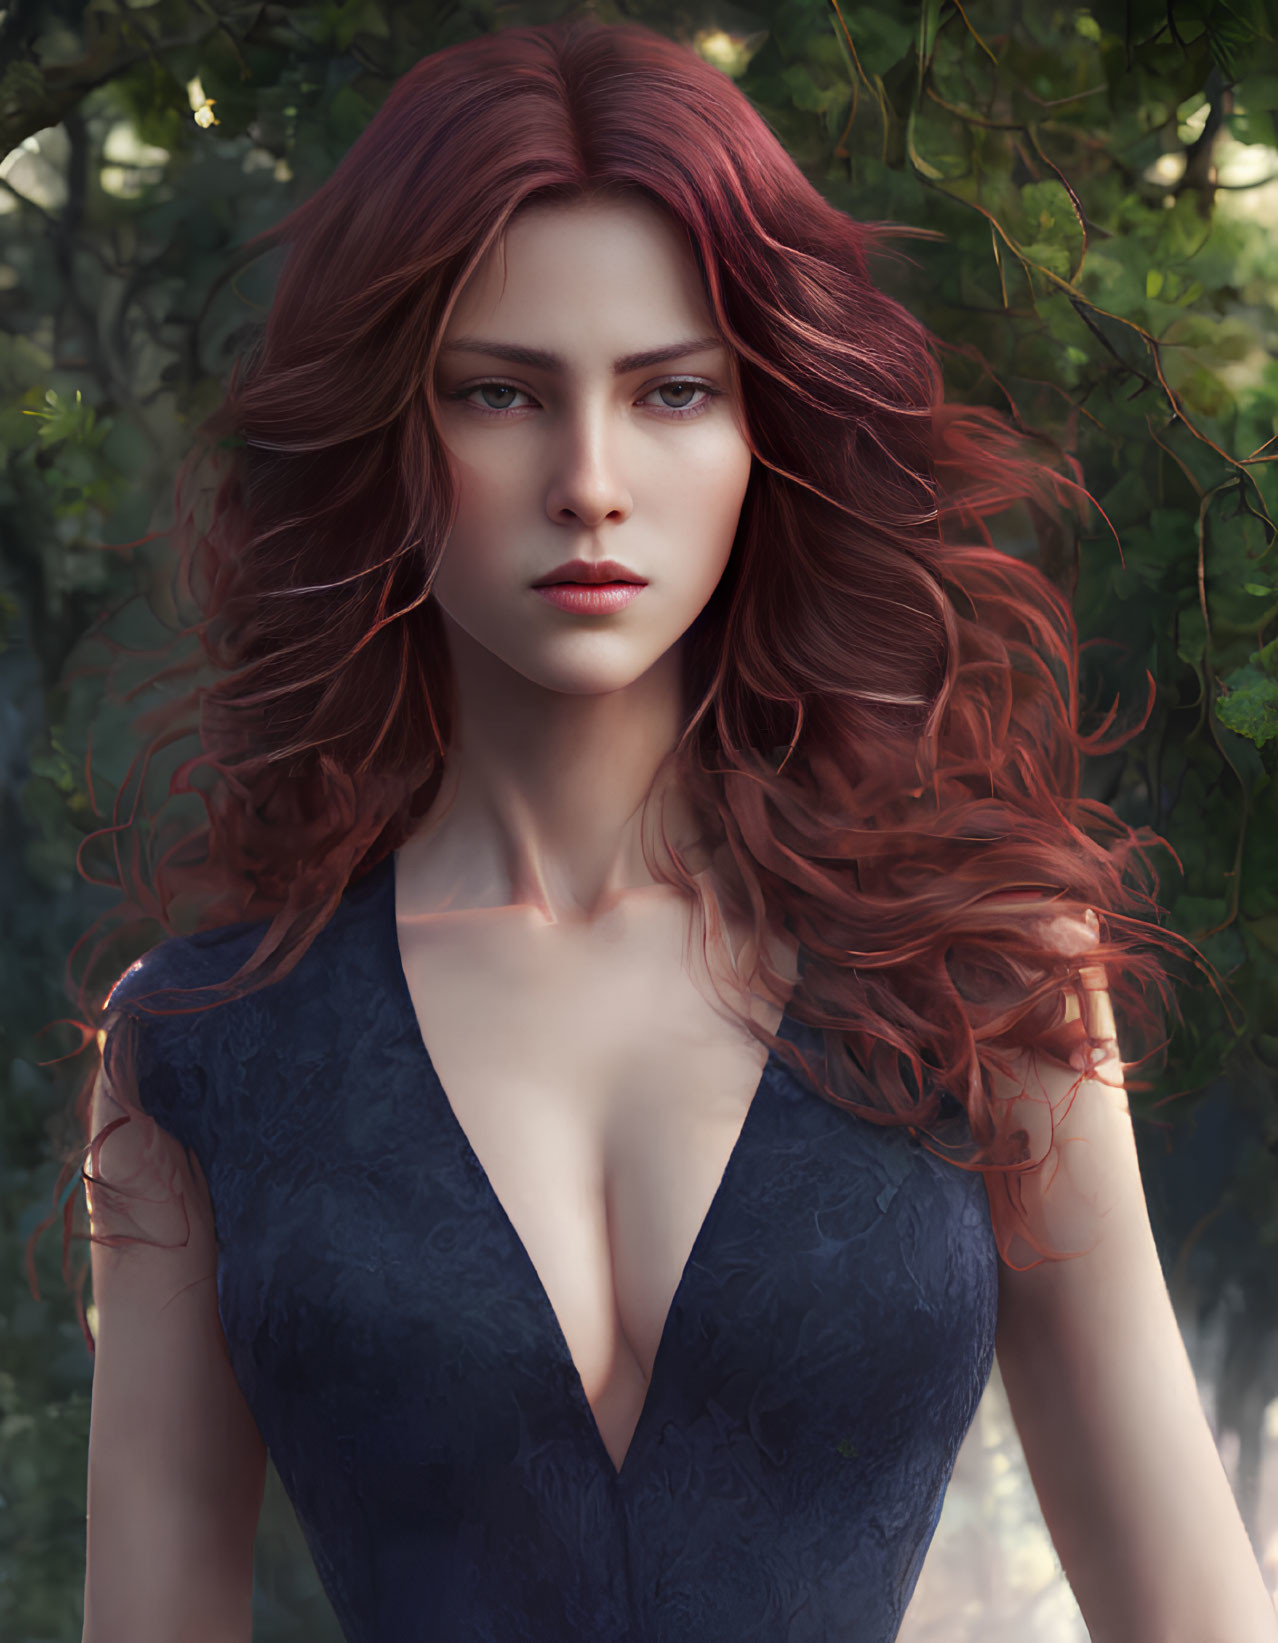 Digital Artwork: Woman with Auburn Hair and Blue Dress in Nature Setting